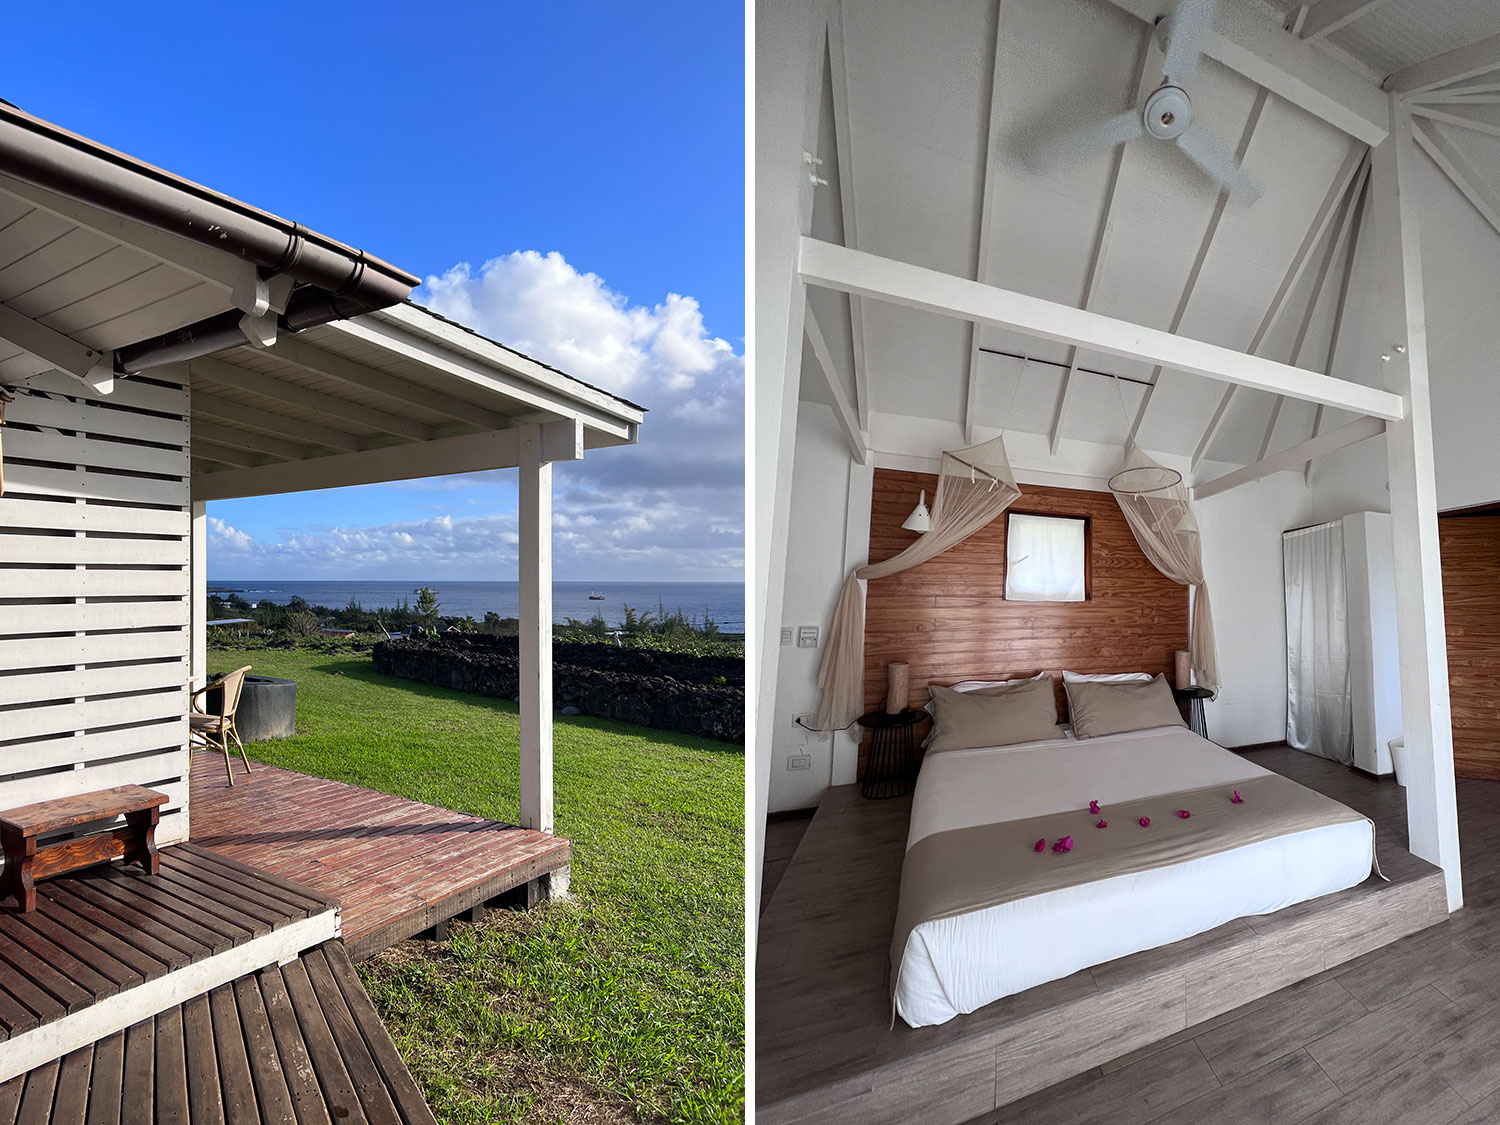 A look at the interior and exterior of the Hotel Altiplanico Rapa Nui on Easter Island.